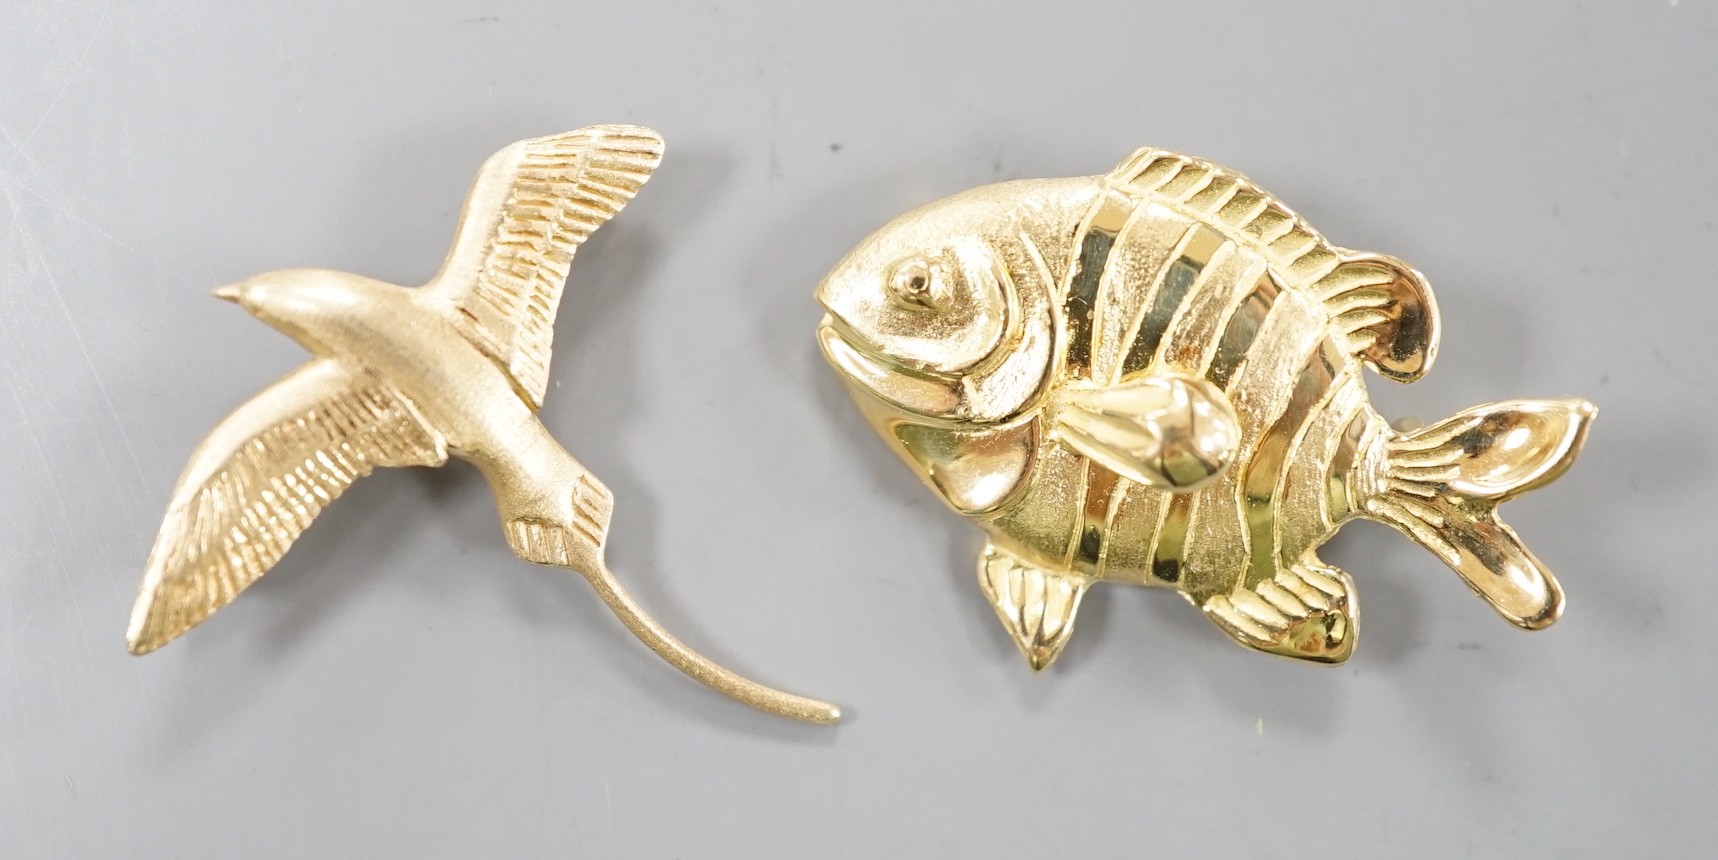 A 14k yellow metal bird brooch modelled as a Bermuda Longtail, 31mm, 2.9 grams and an Astwood Dickenson 18ct fish pendant brooch, 6.5 grams.